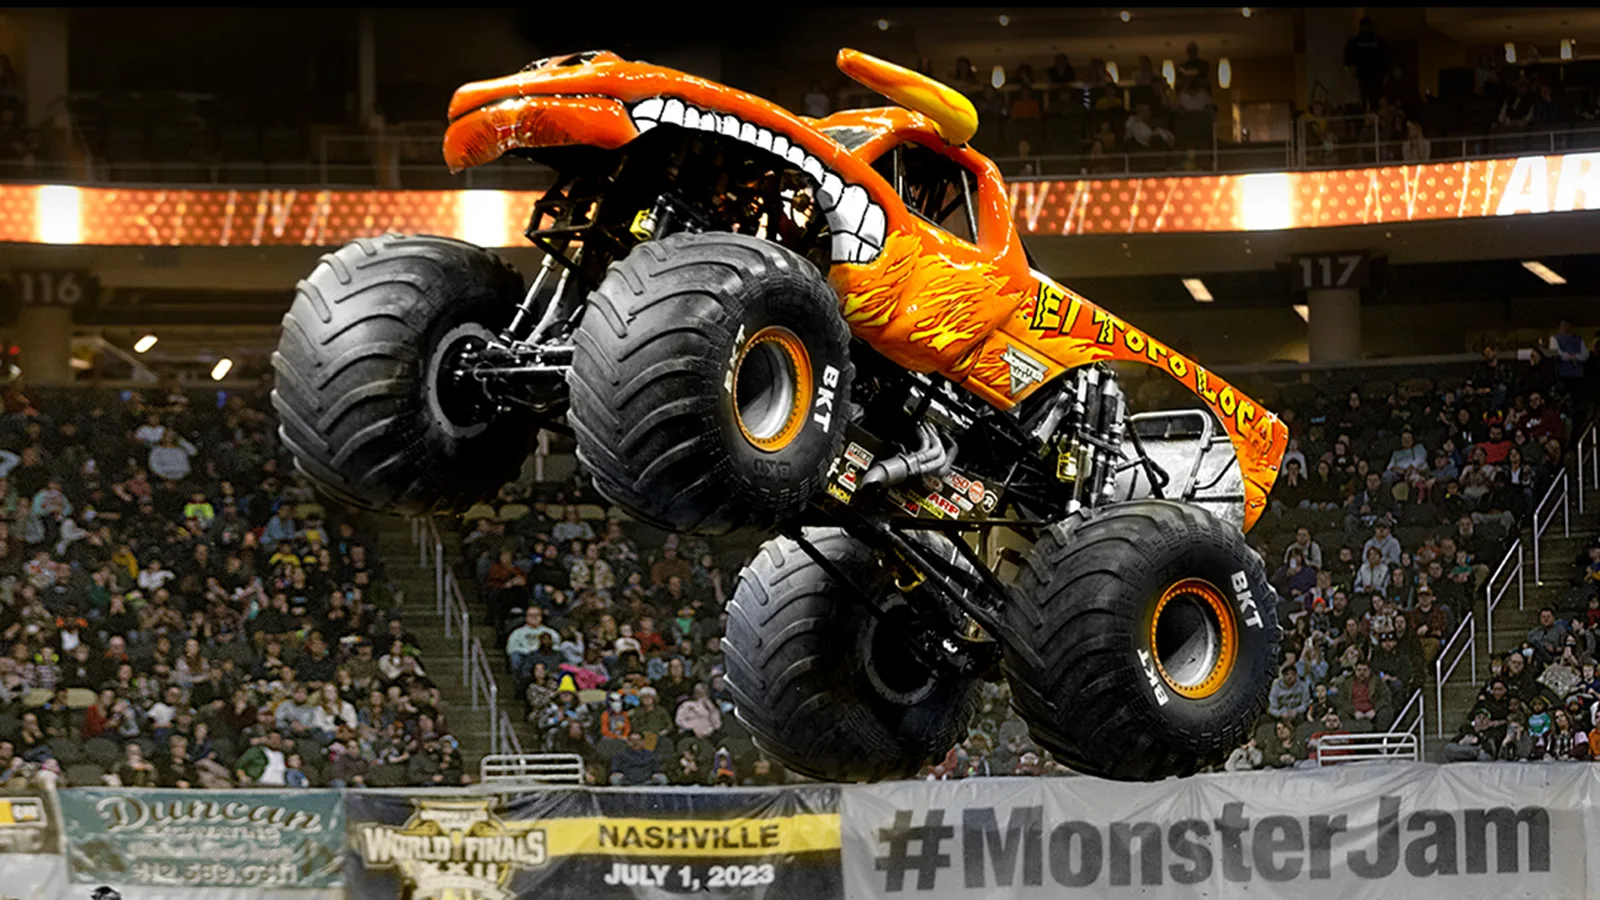 The El Toro Loco truck flies through the air at Monster Jam with a crowd in the background